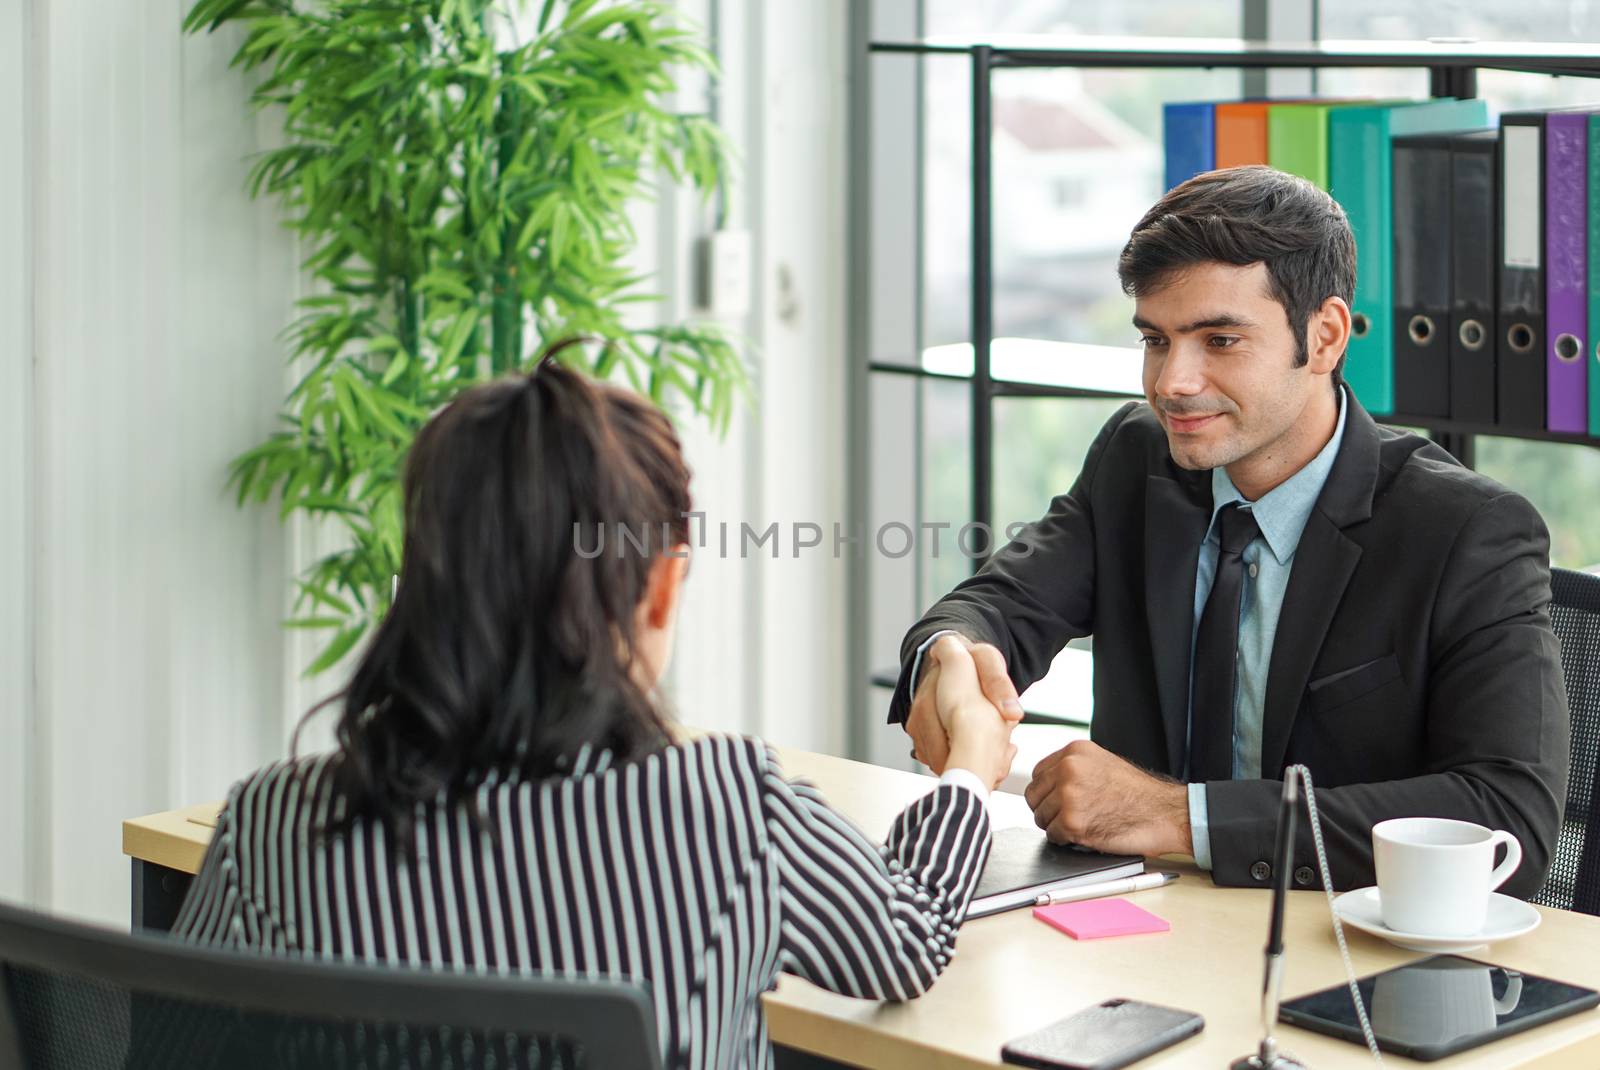 Young employers in black suits shaking hands during a meeting in the office. Pleasant atmosphere after a job interview.